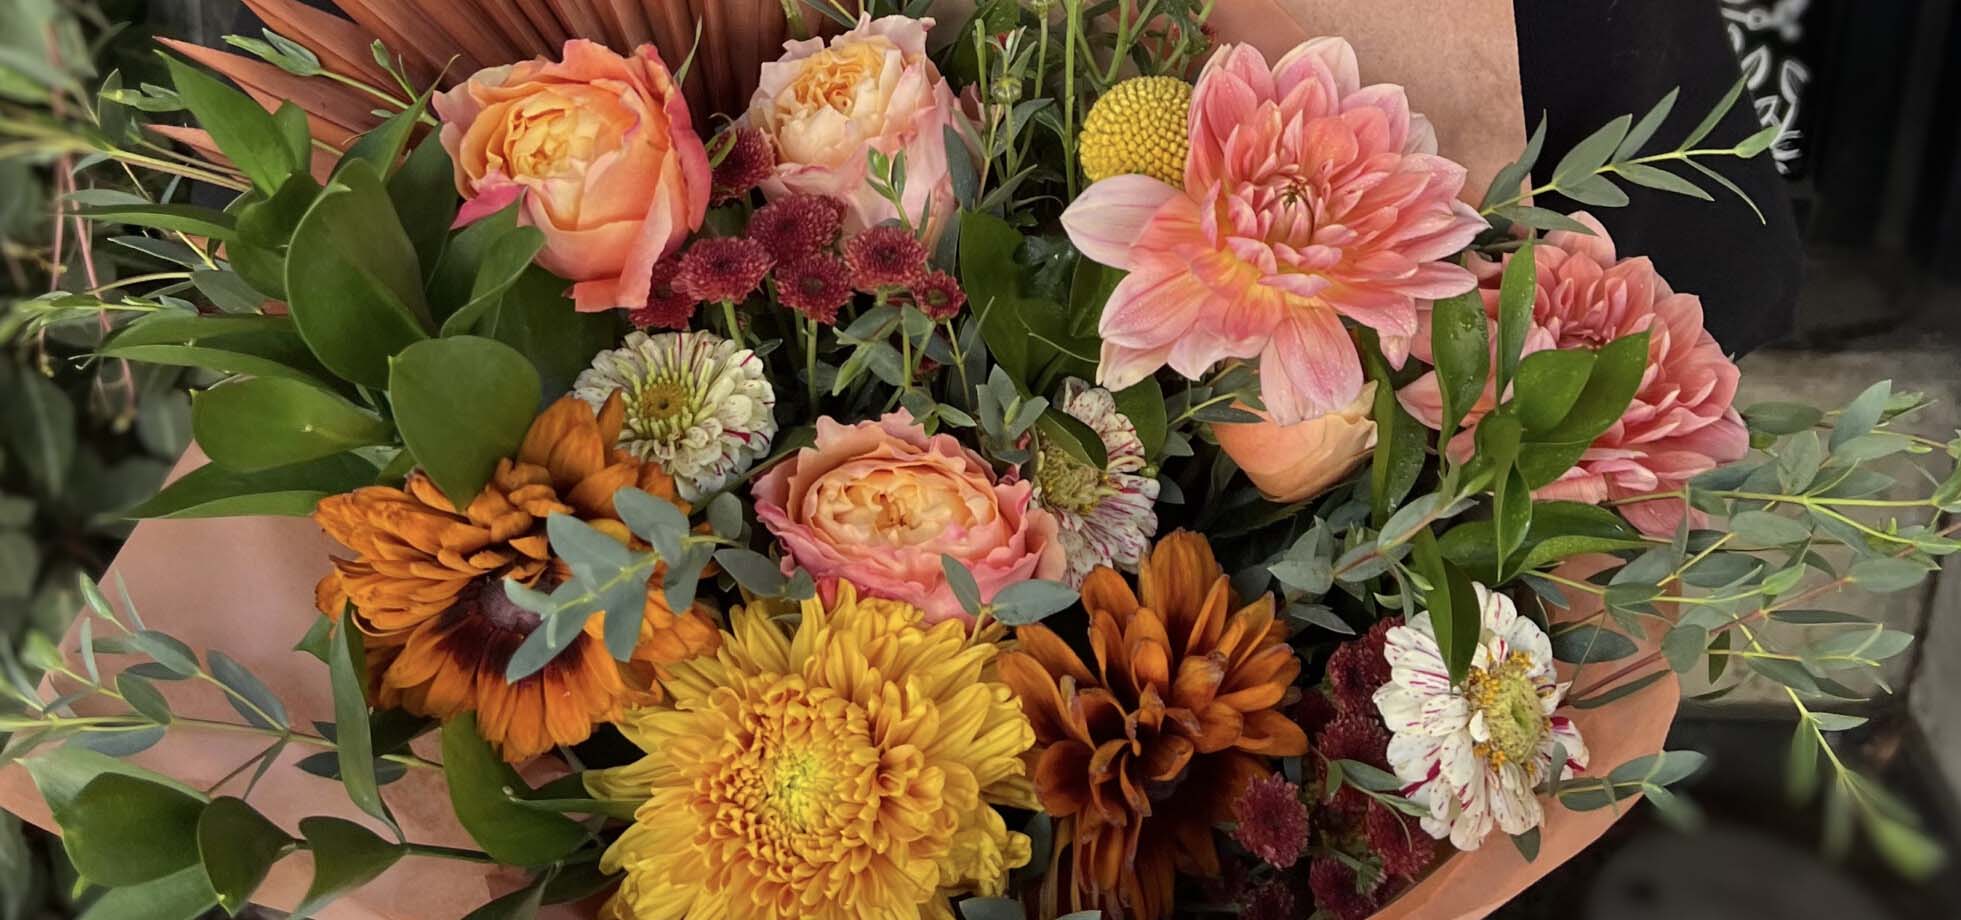 Bouquet of fall flowers.